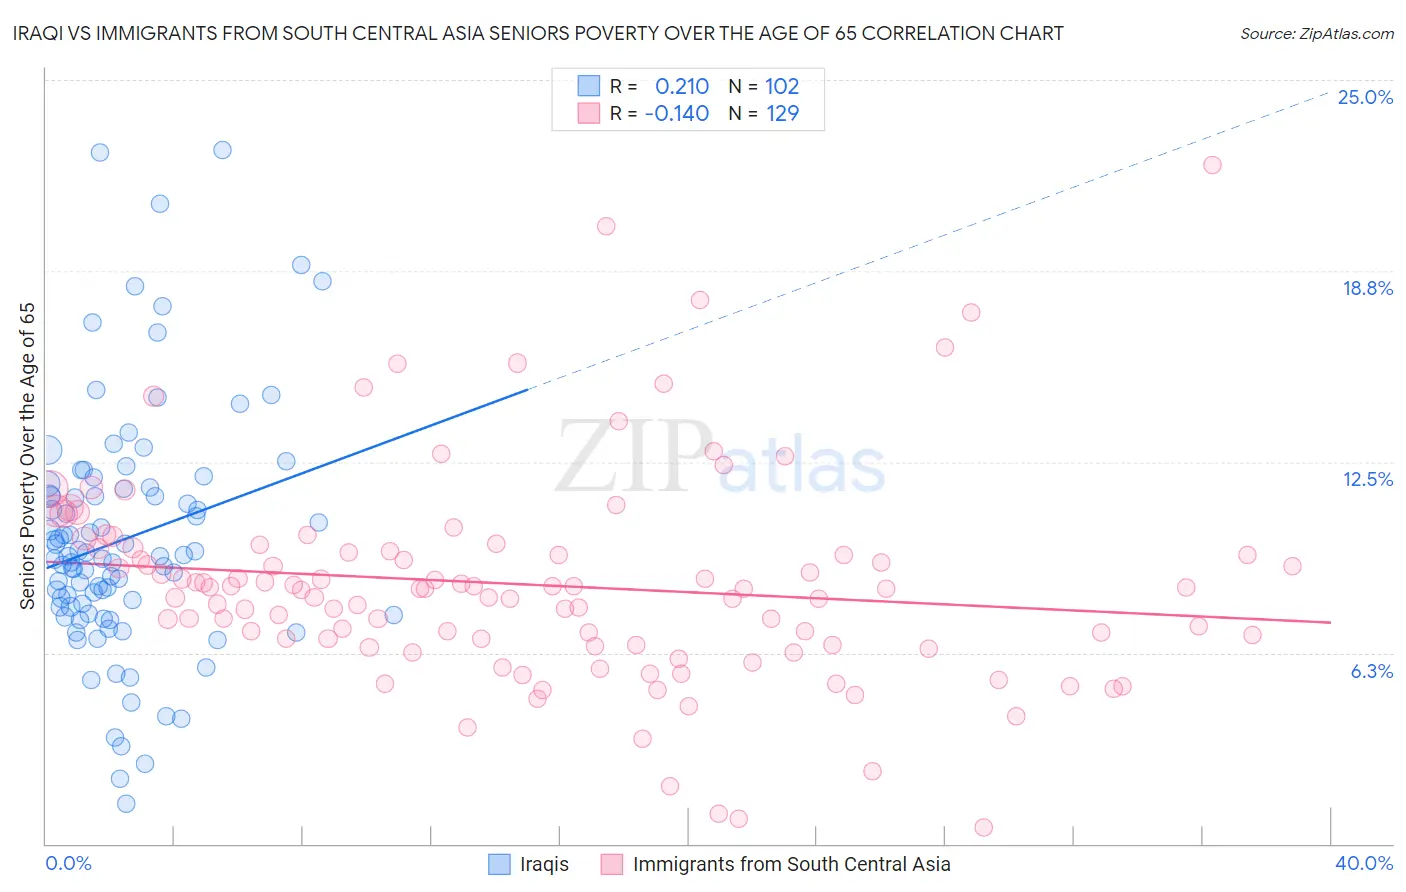 Iraqi vs Immigrants from South Central Asia Seniors Poverty Over the Age of 65